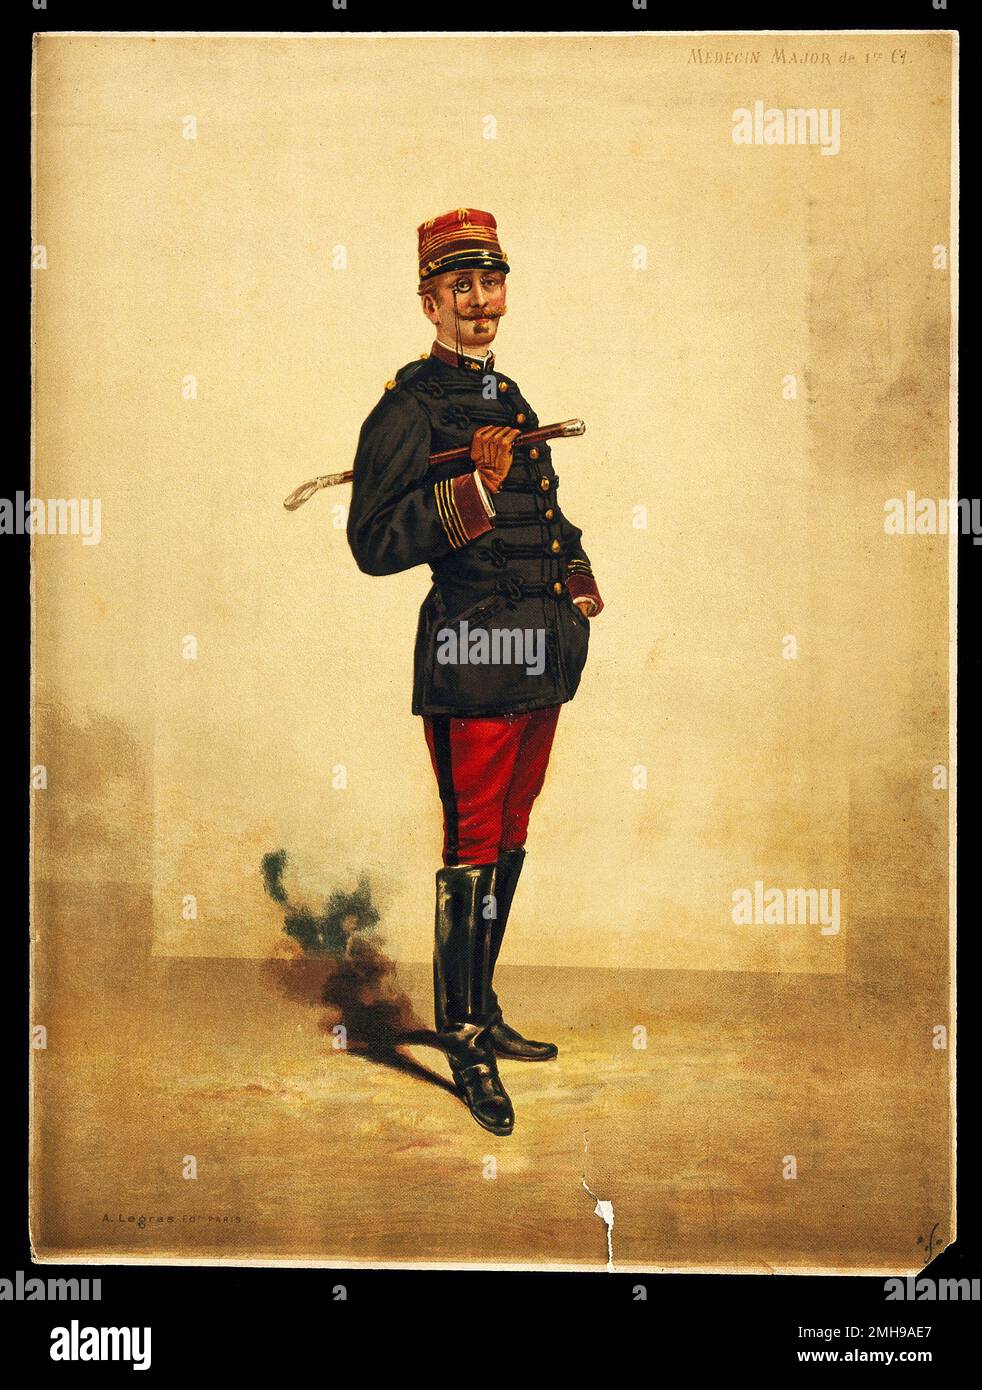 a French army medical officer (1st class) in his uniform during the Franco-Prussian War. Chromolithograph, c. 1870. Stock Photo